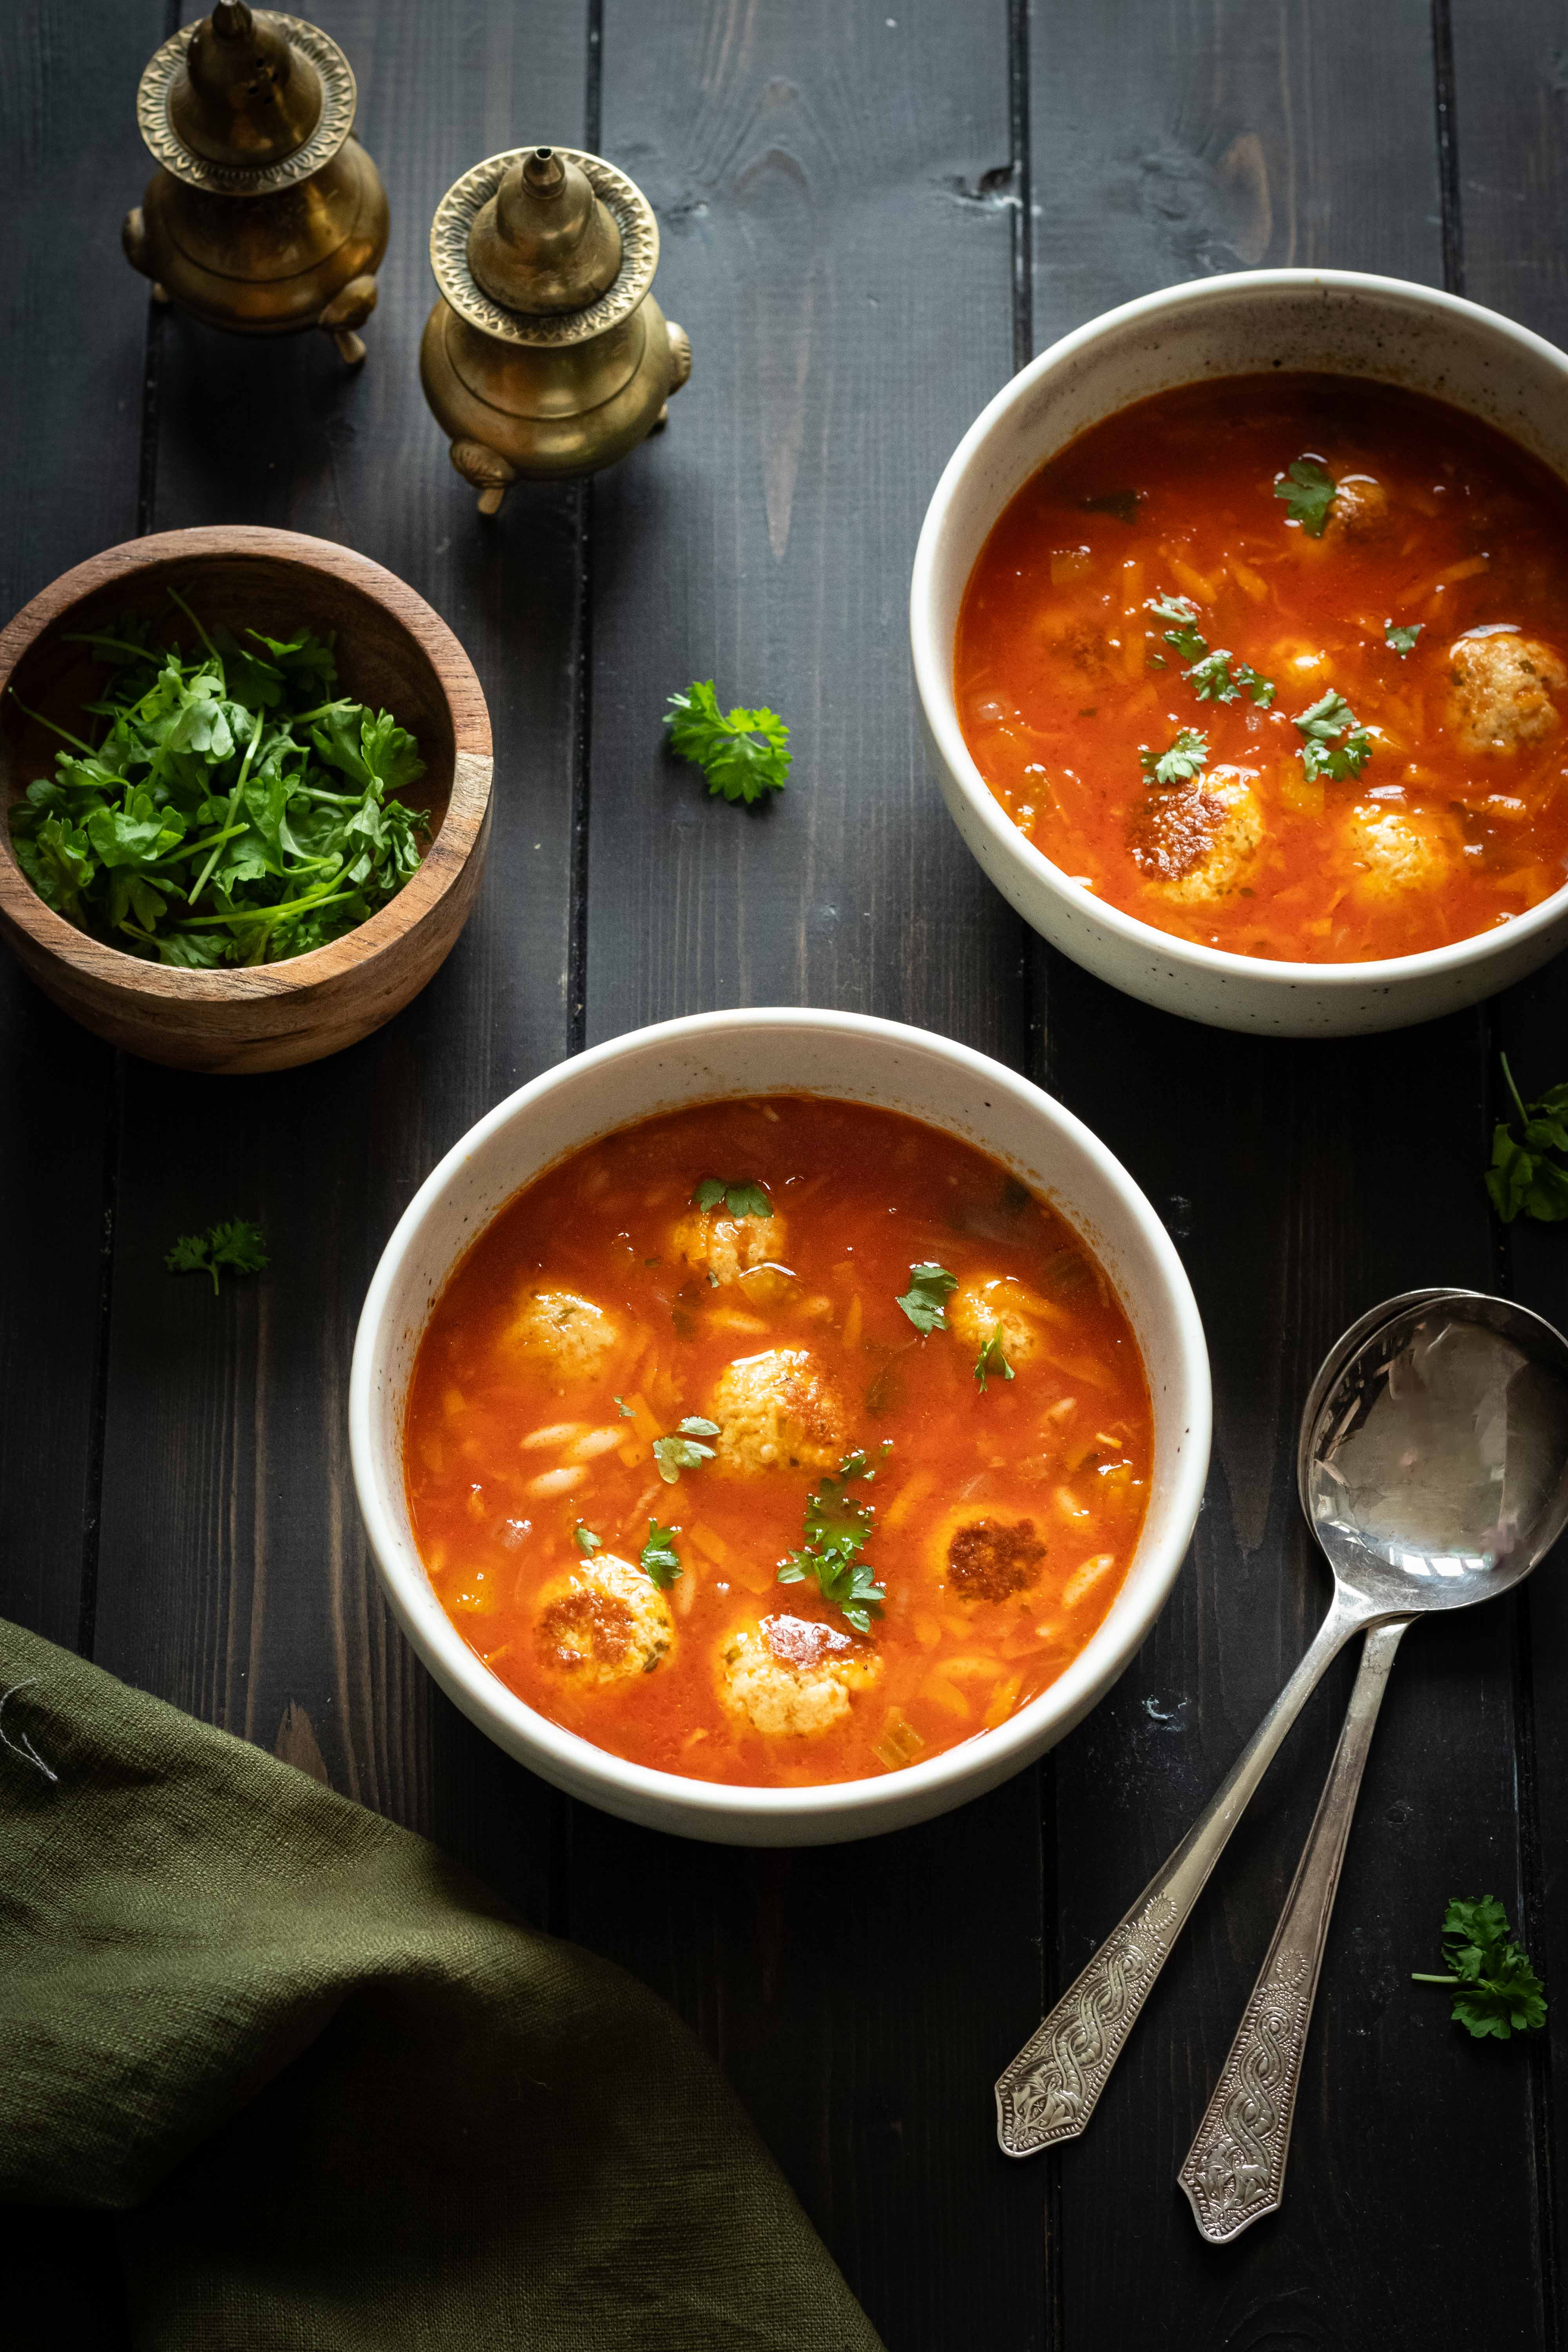 Chicken meatballs and orzo soup 